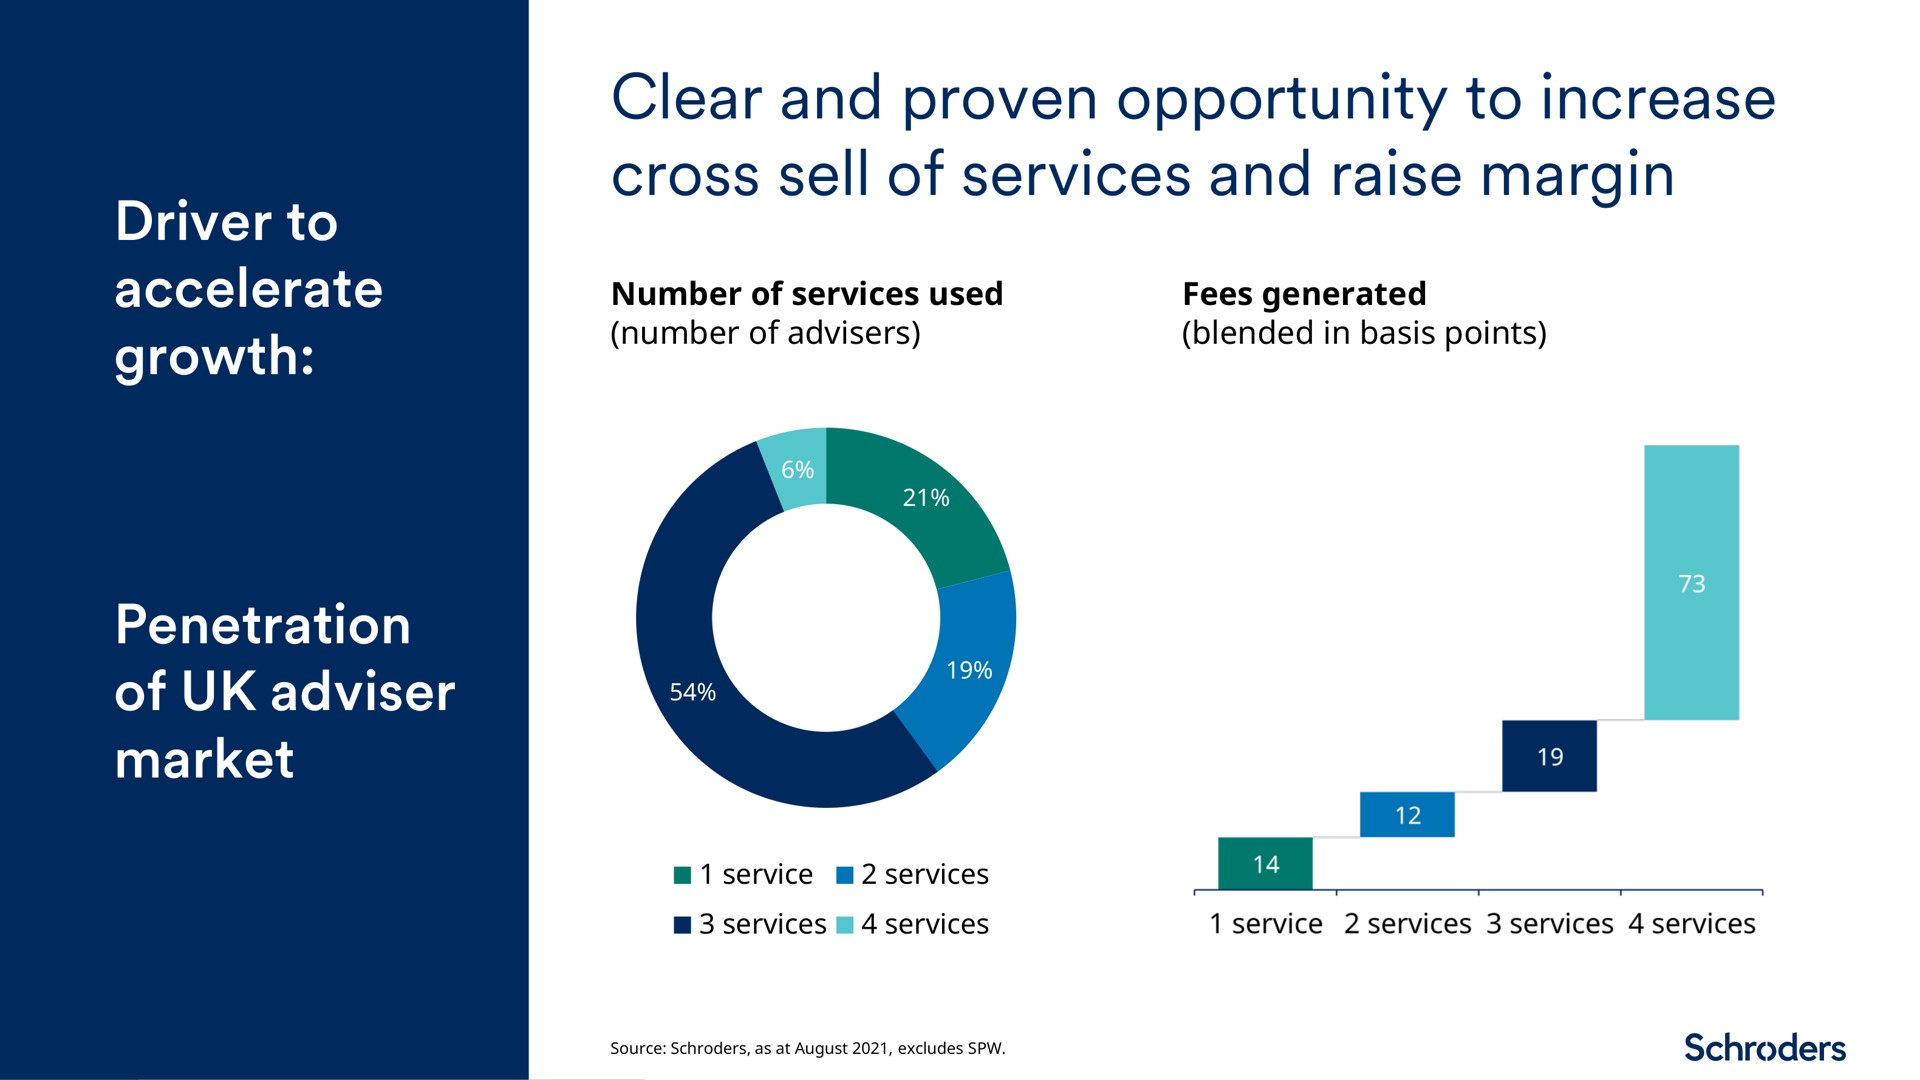 clear and proven opportunity to increase cross sell of services and raise margin | Schroders